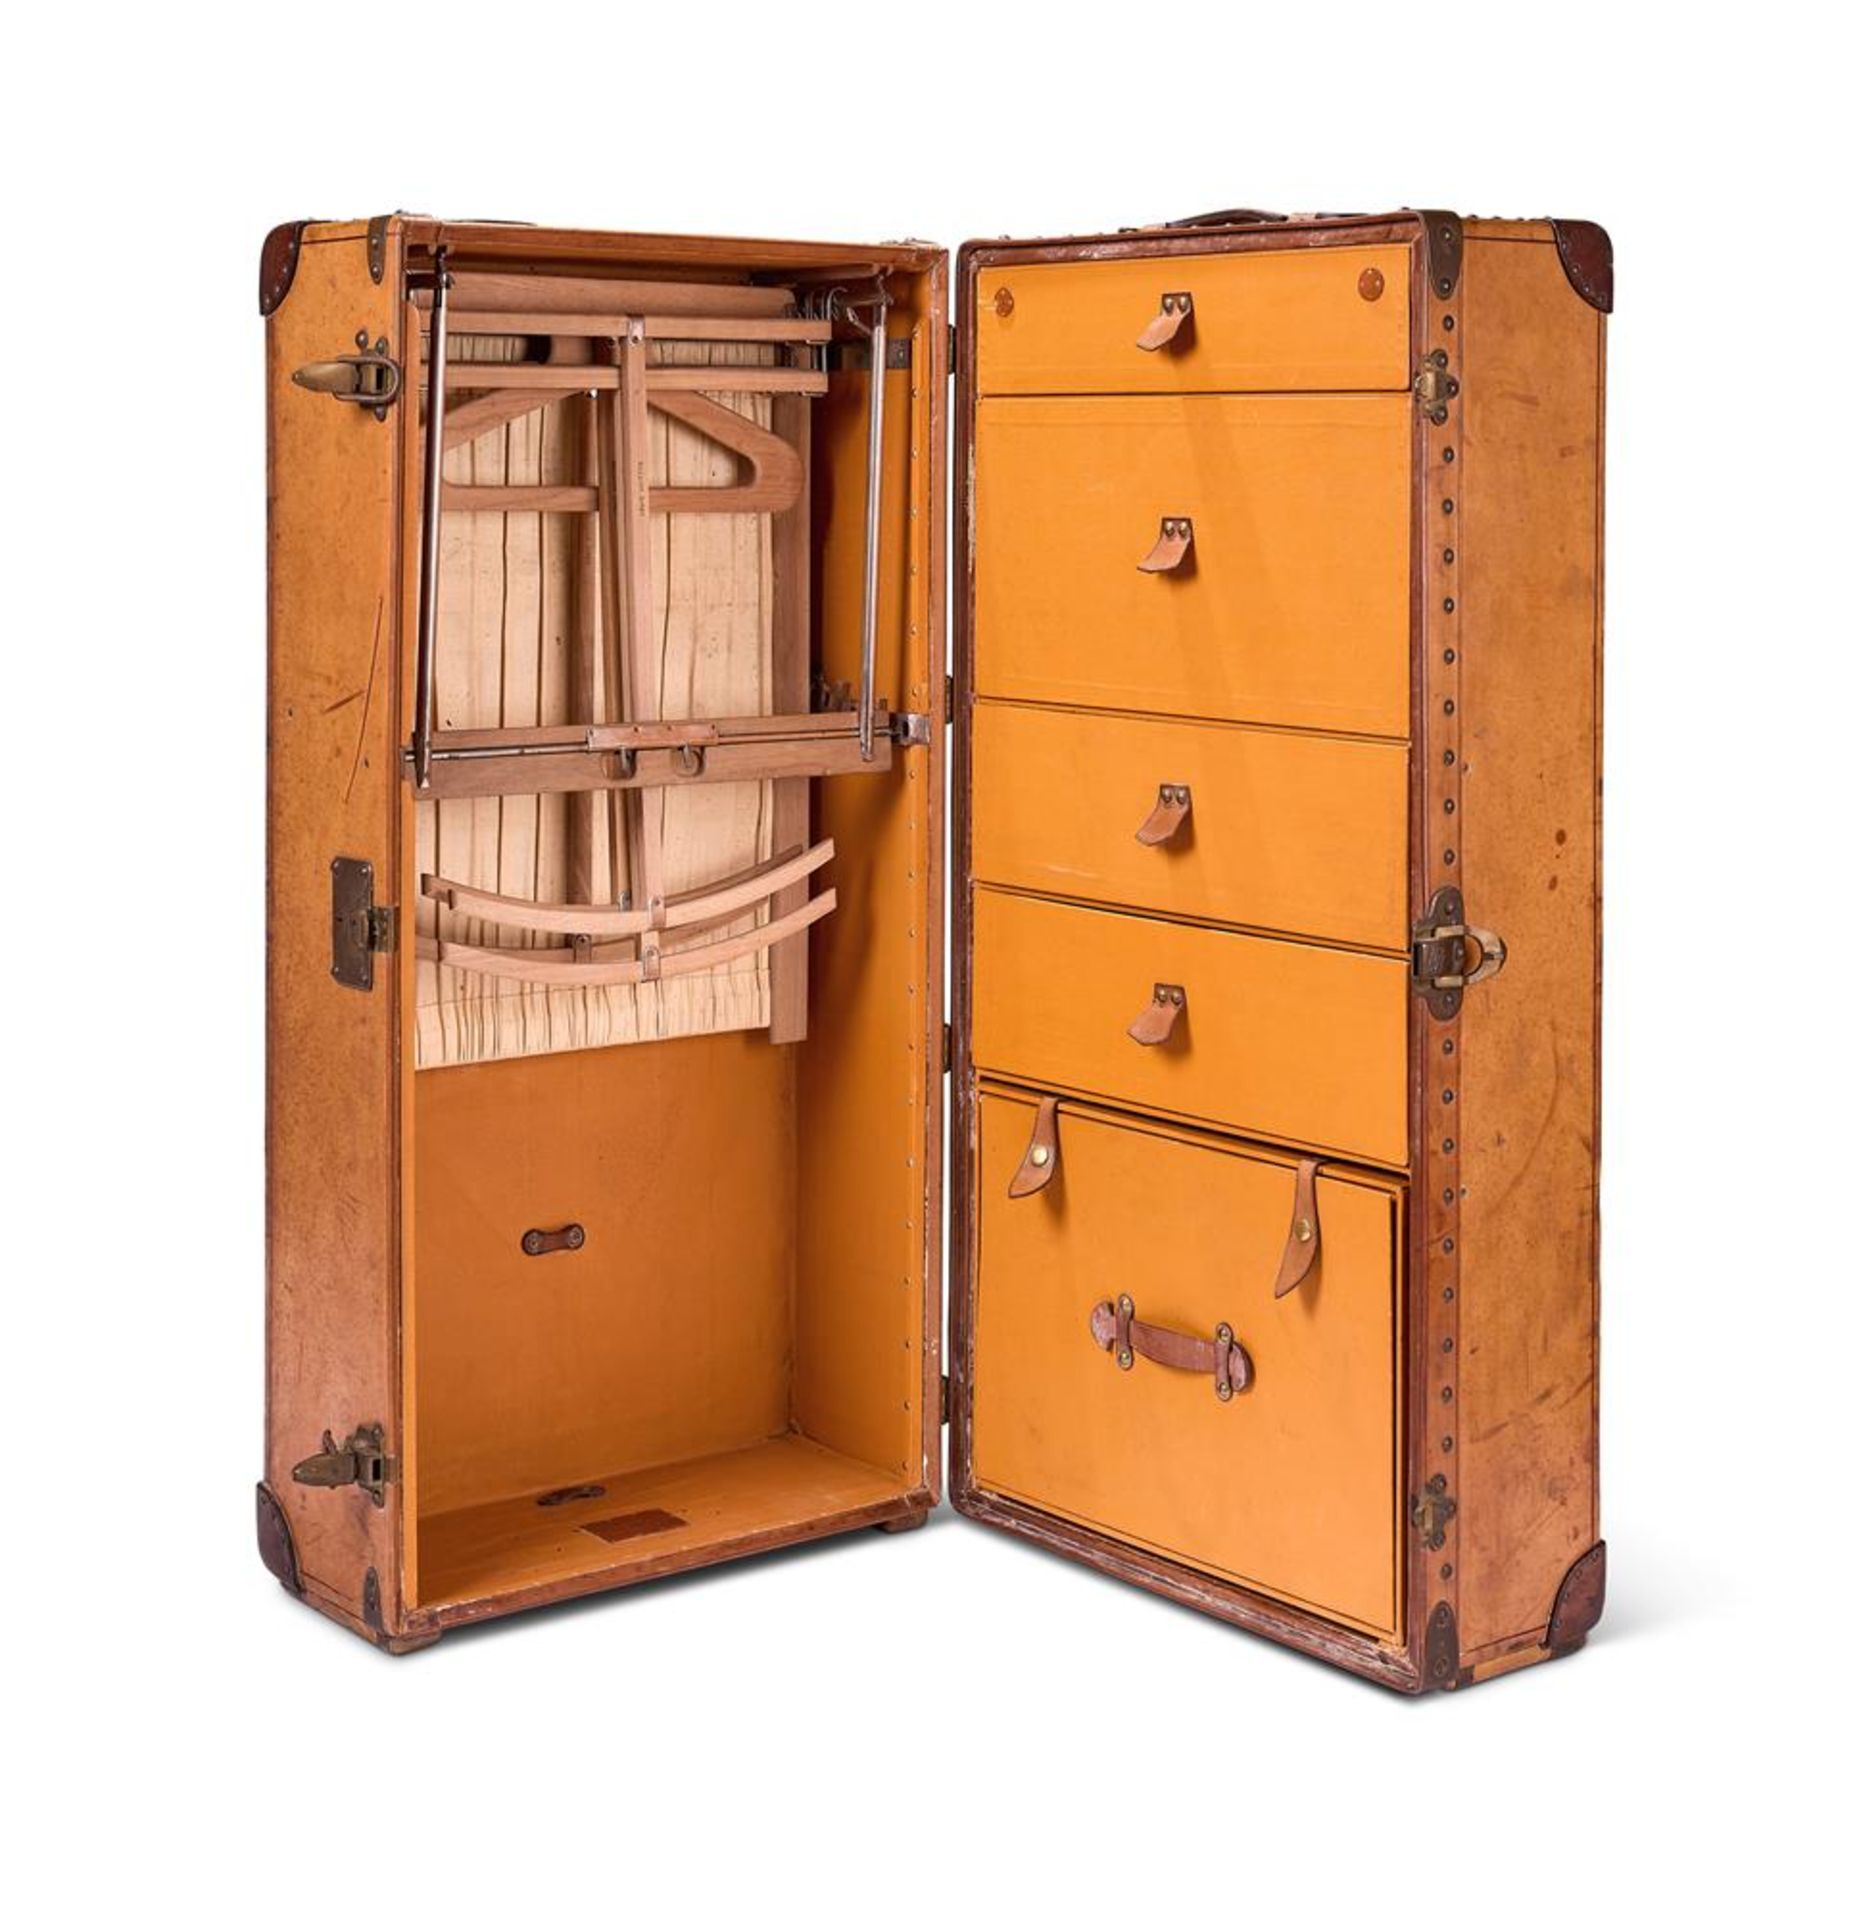 LOUIS VUITTON, A BROWN LEATHER WARDROBE STEAMER TRUNK - Image 5 of 5